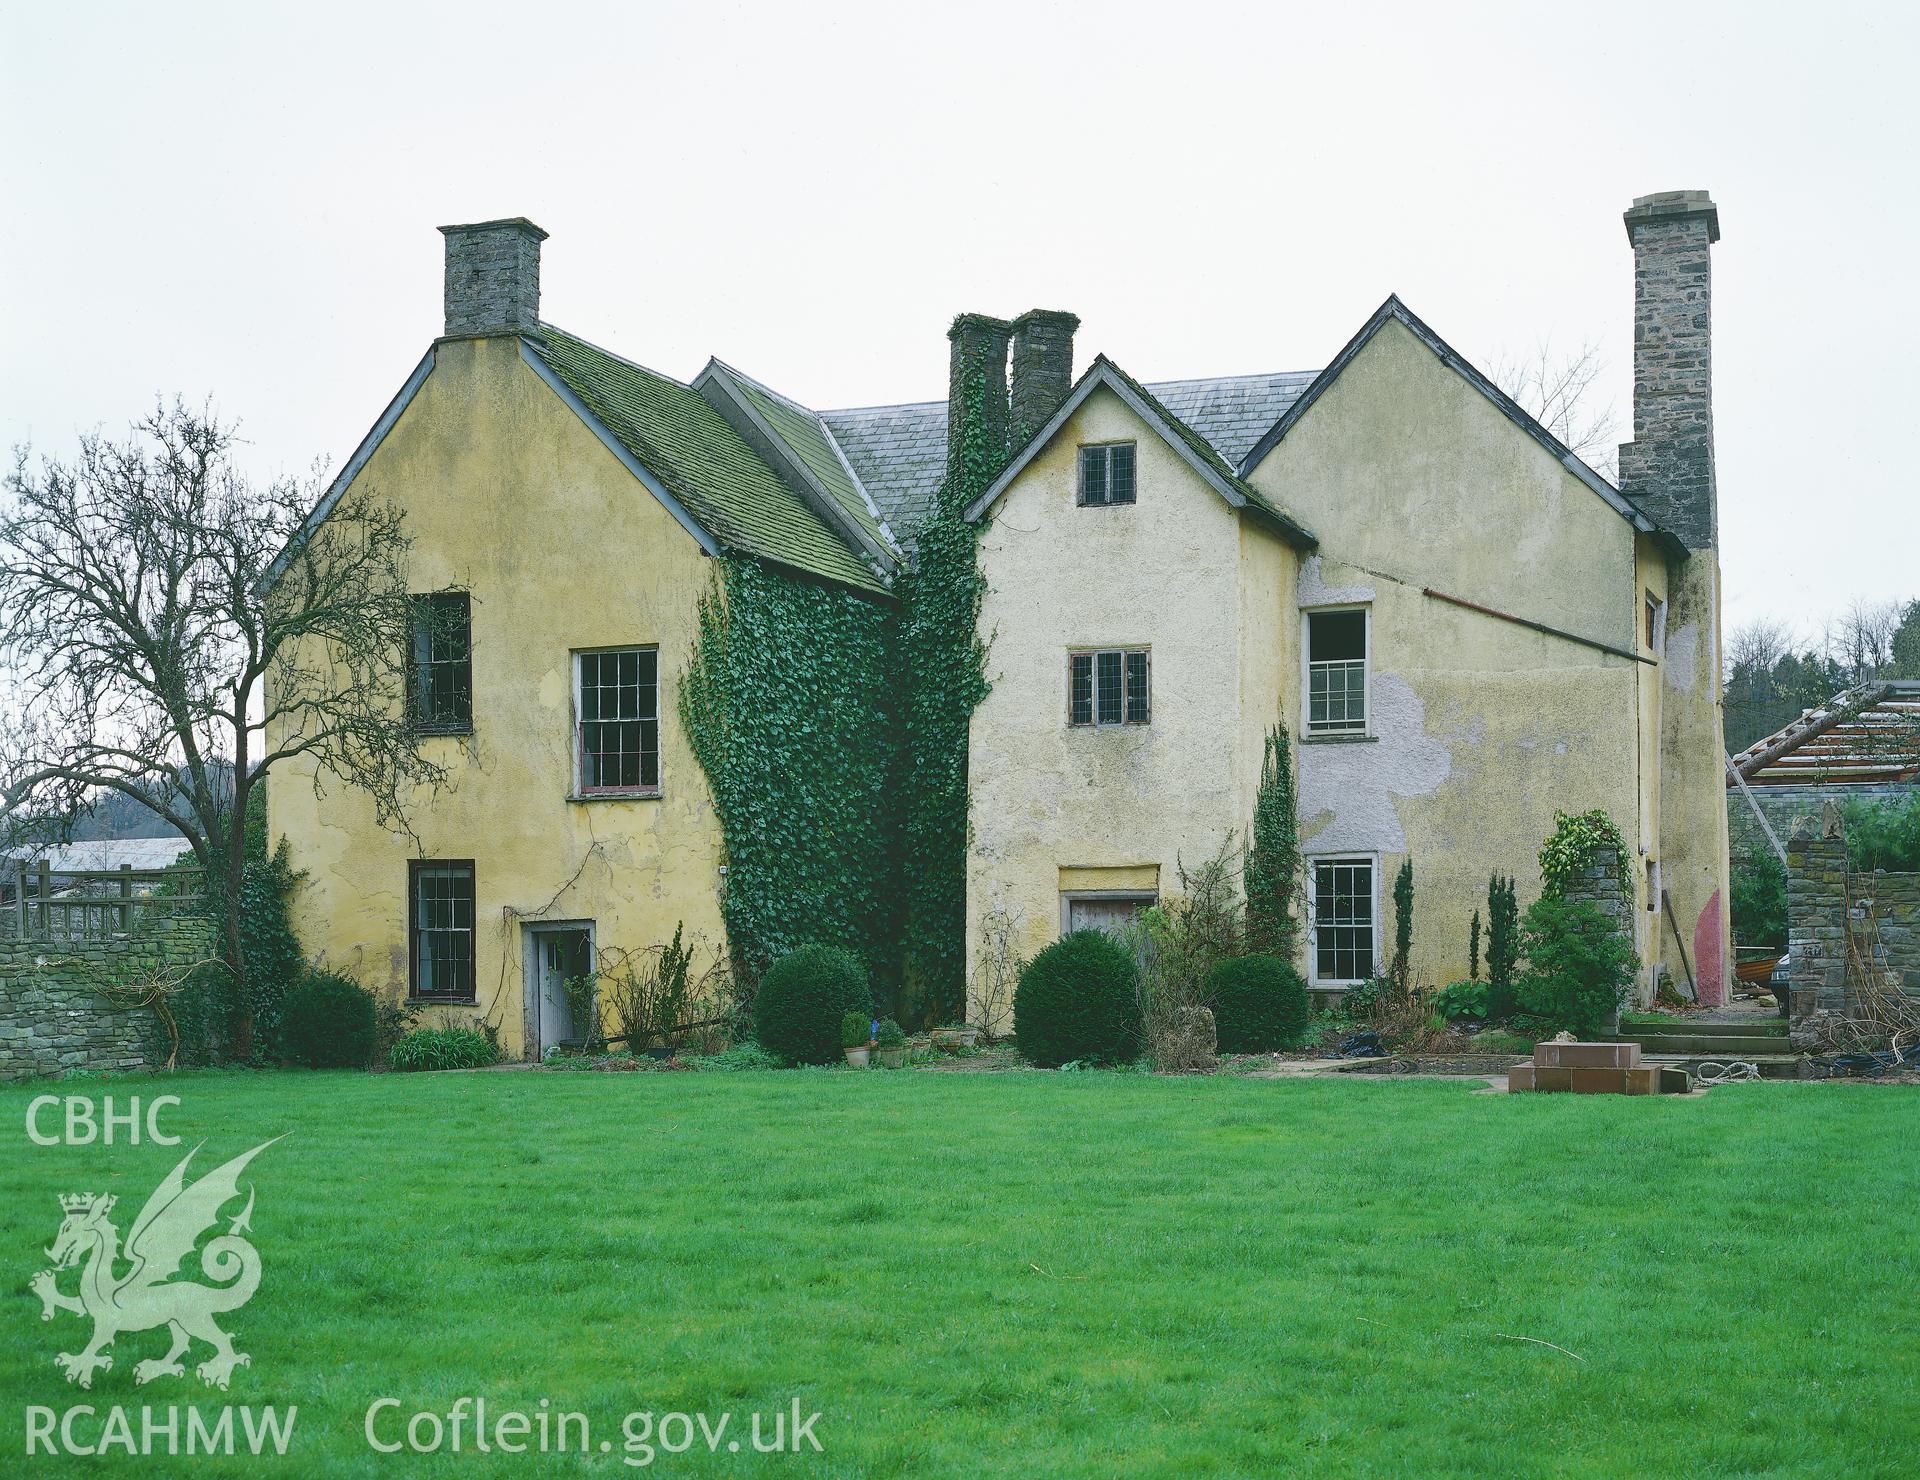 RCAHMW colour transparency of an exterior view of the rear of Llowes Court, Glasbury